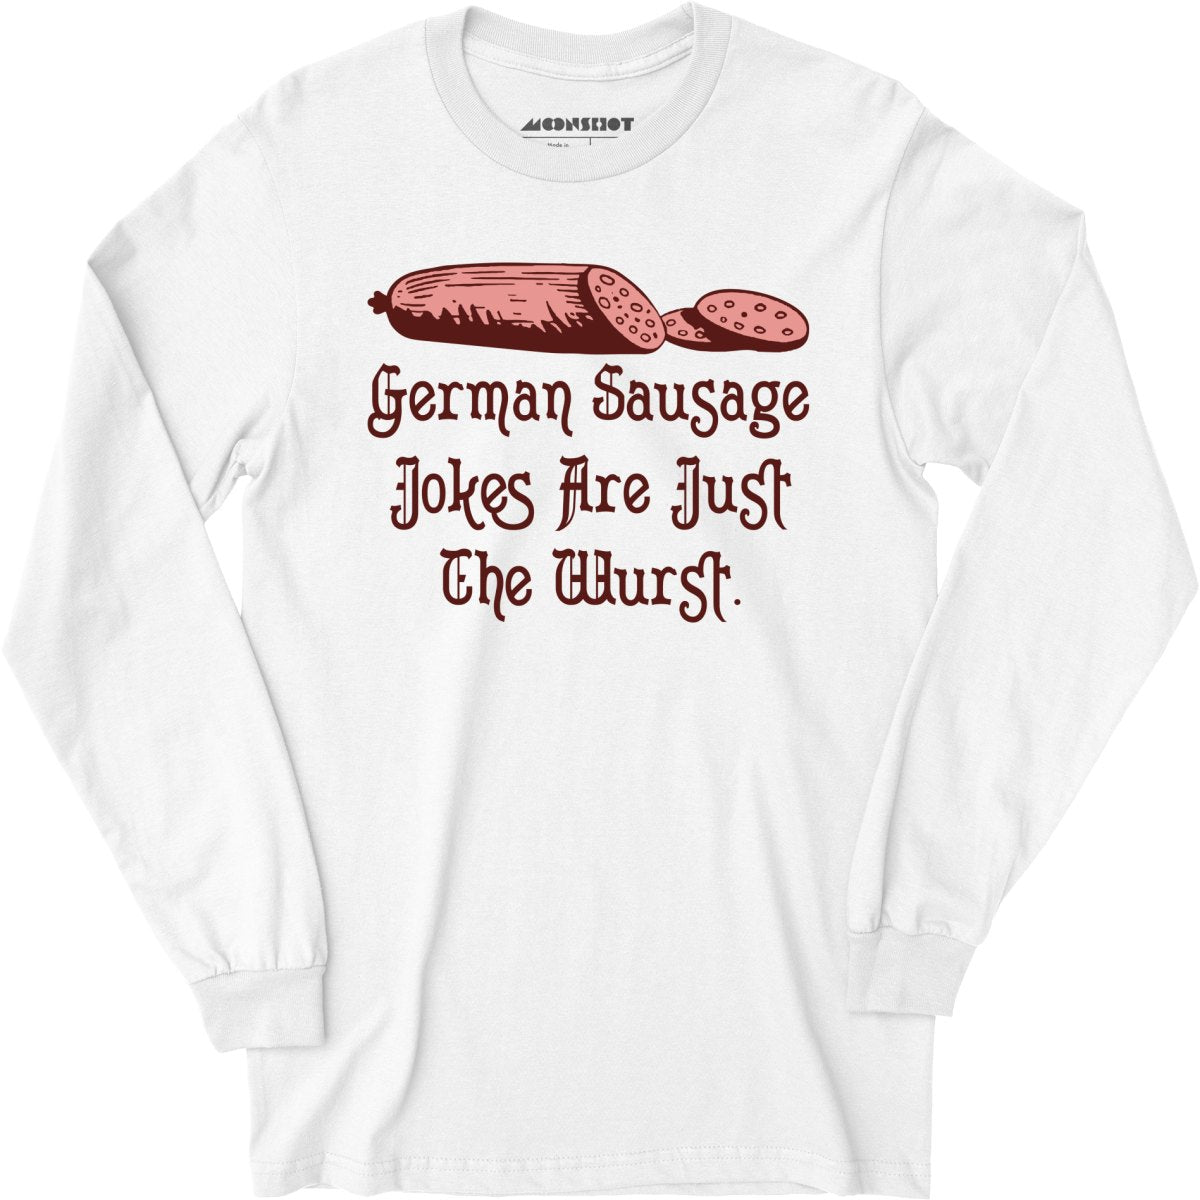 German Sausage Jokes Are Just The Wurst - Long Sleeve T-Shirt